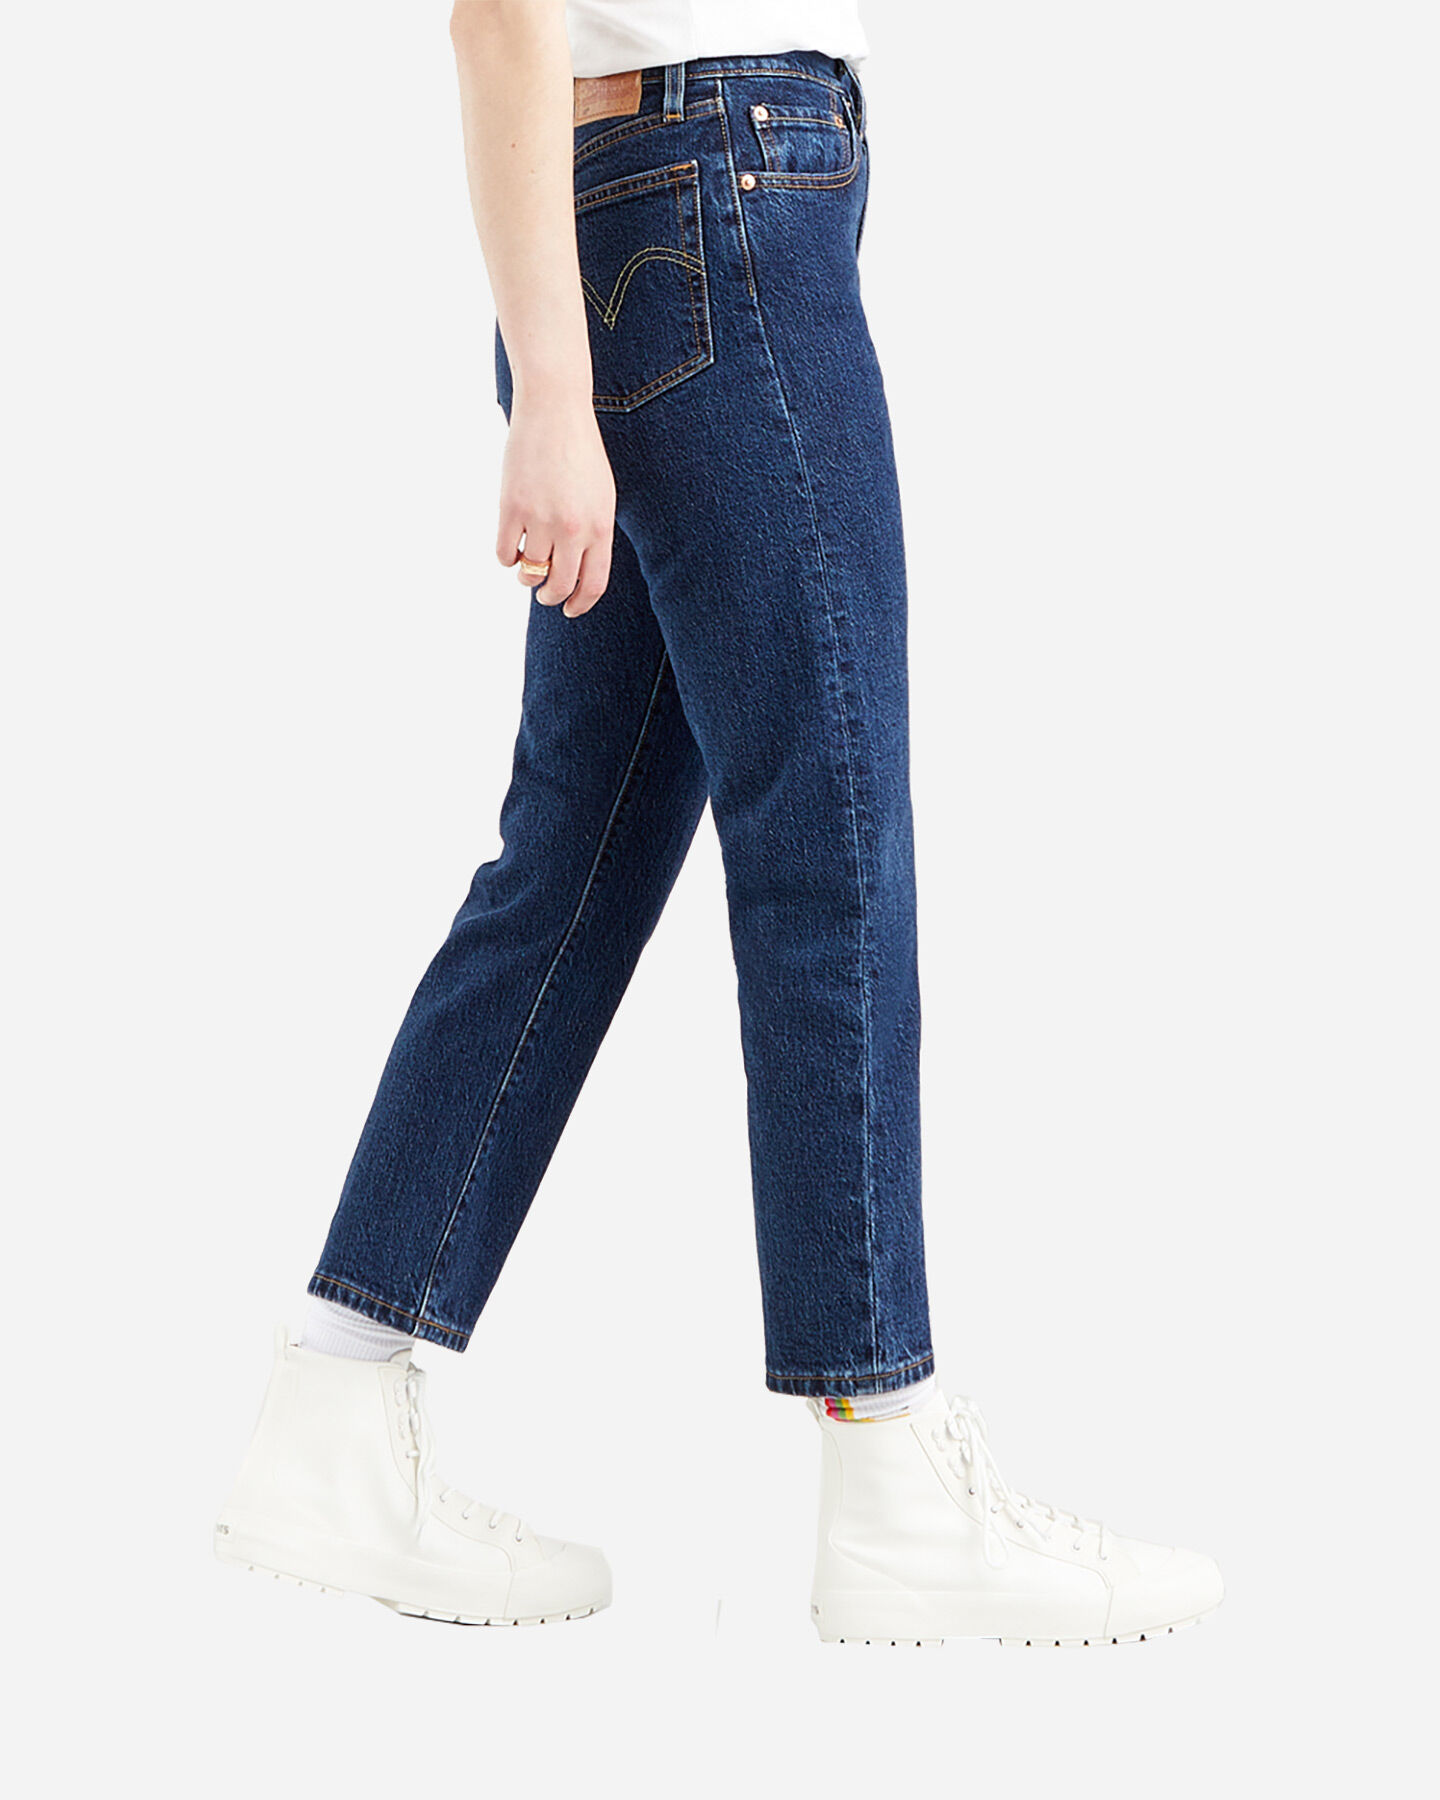  Jeans LEVI'S 501 CROP W S4097261|0179|26 scatto 1